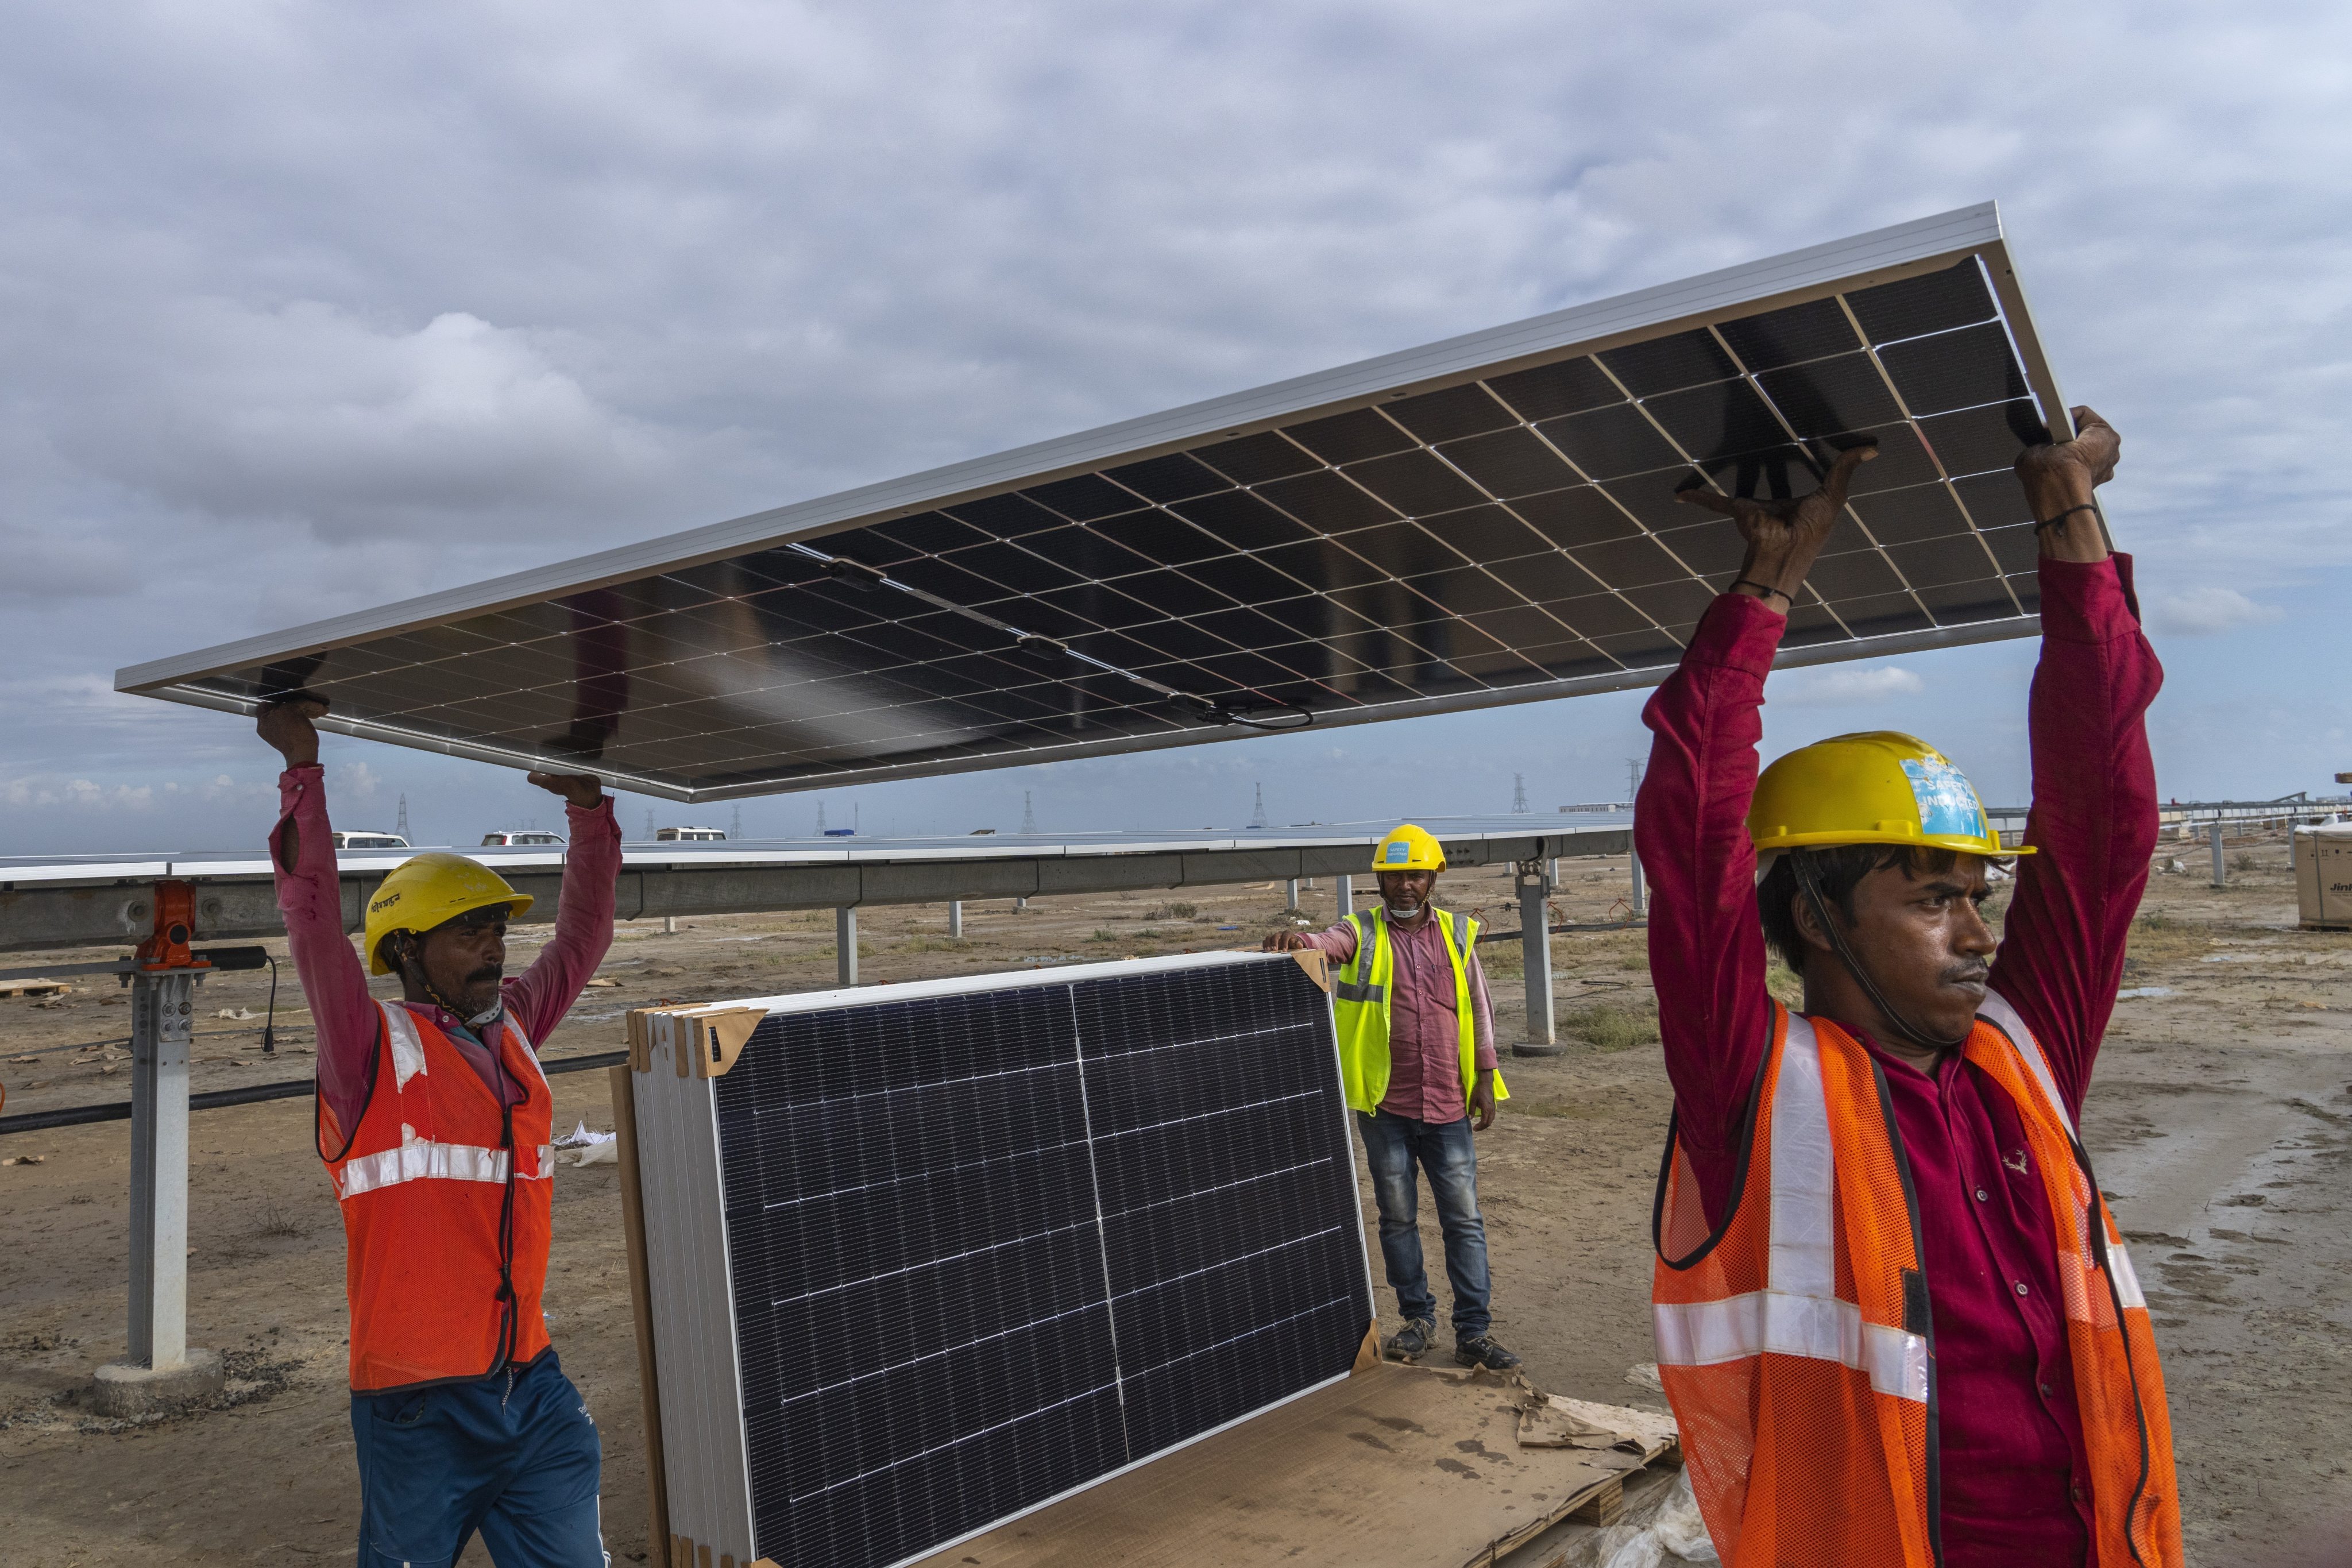 Workers carry a solar panel for installation at the Adani Green Energy Limited’s renewable energy park in the salt desert of Karim Shahi village, near Khavda in Gujarat, India, on September 21. Photo: AP